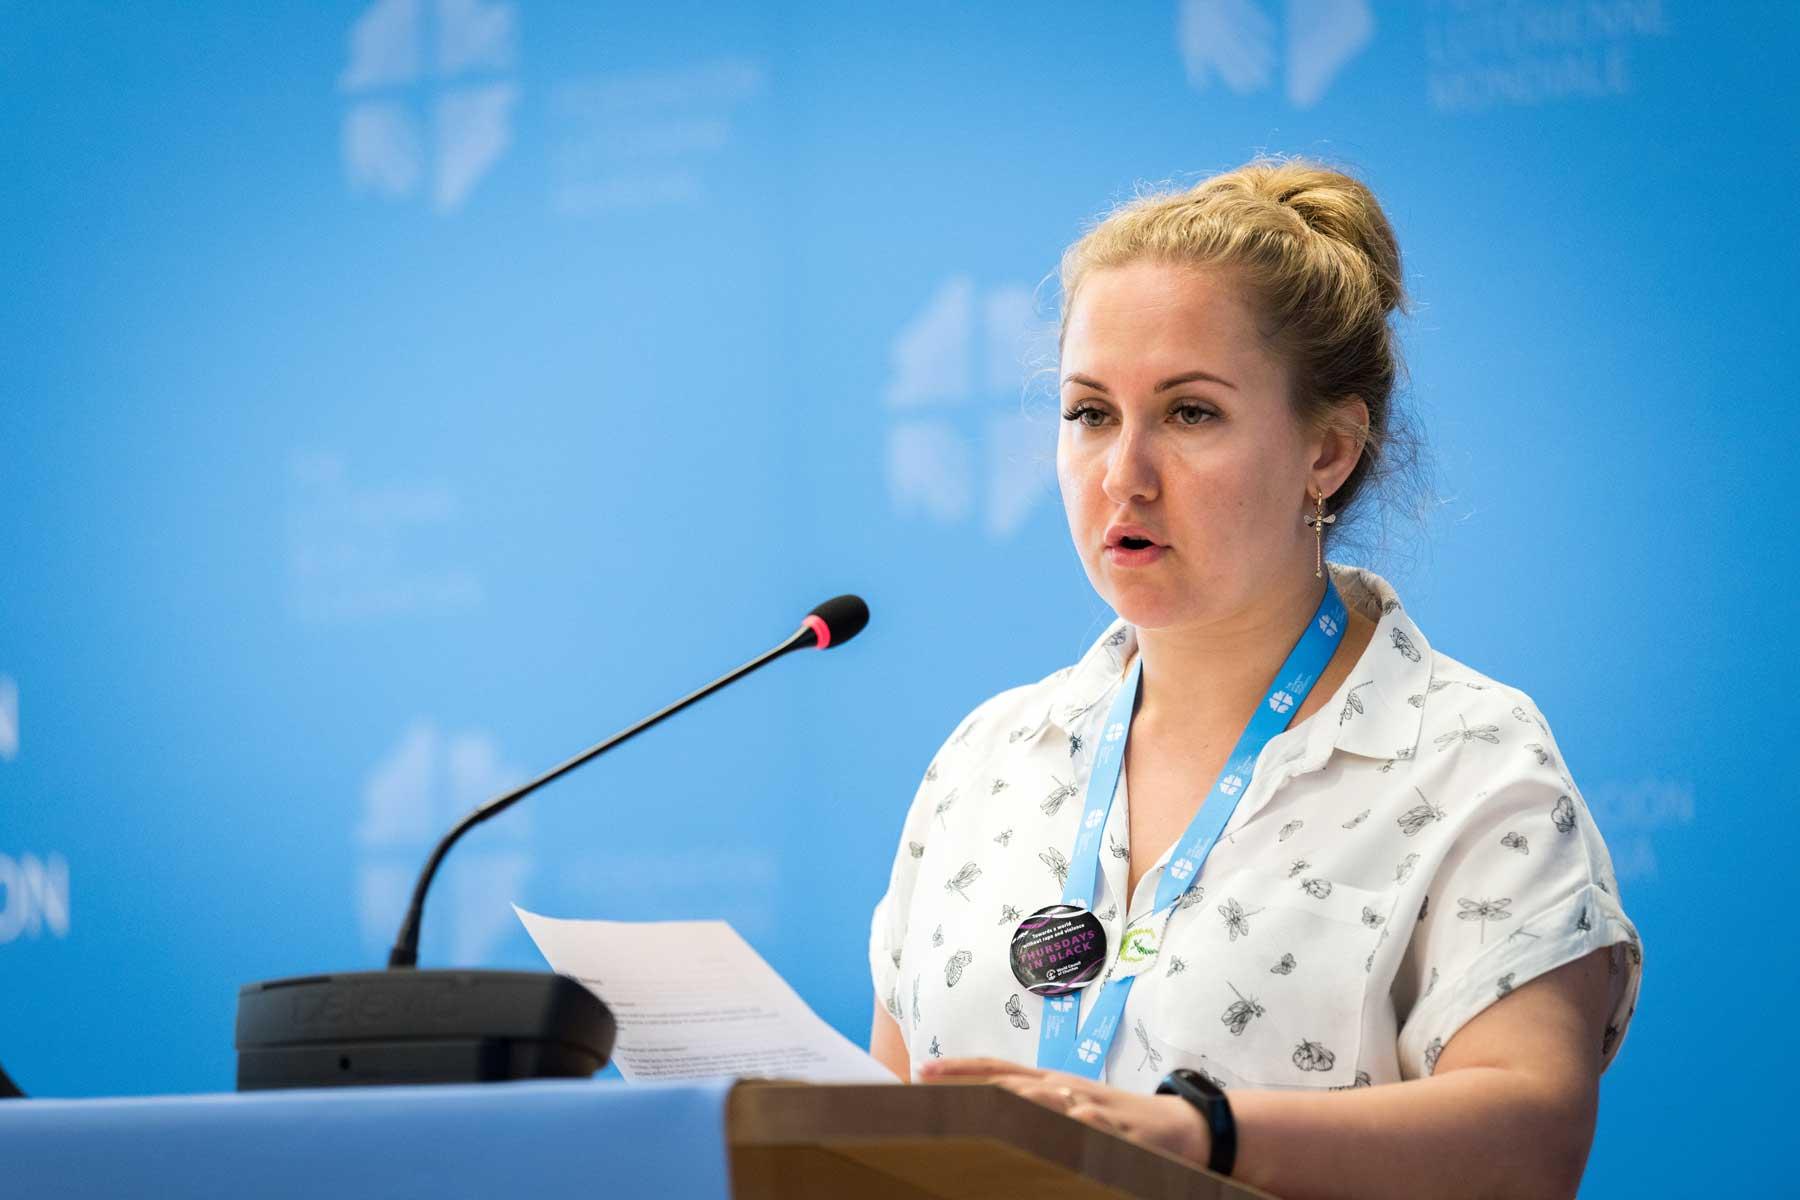 Ms Vera Tkach, chairperson of the Ad-hoc Committee for Advocacy and Public Voice, presents the resolution on Nigeria to the LWF council. Photo: LWF/ Albin Hillert